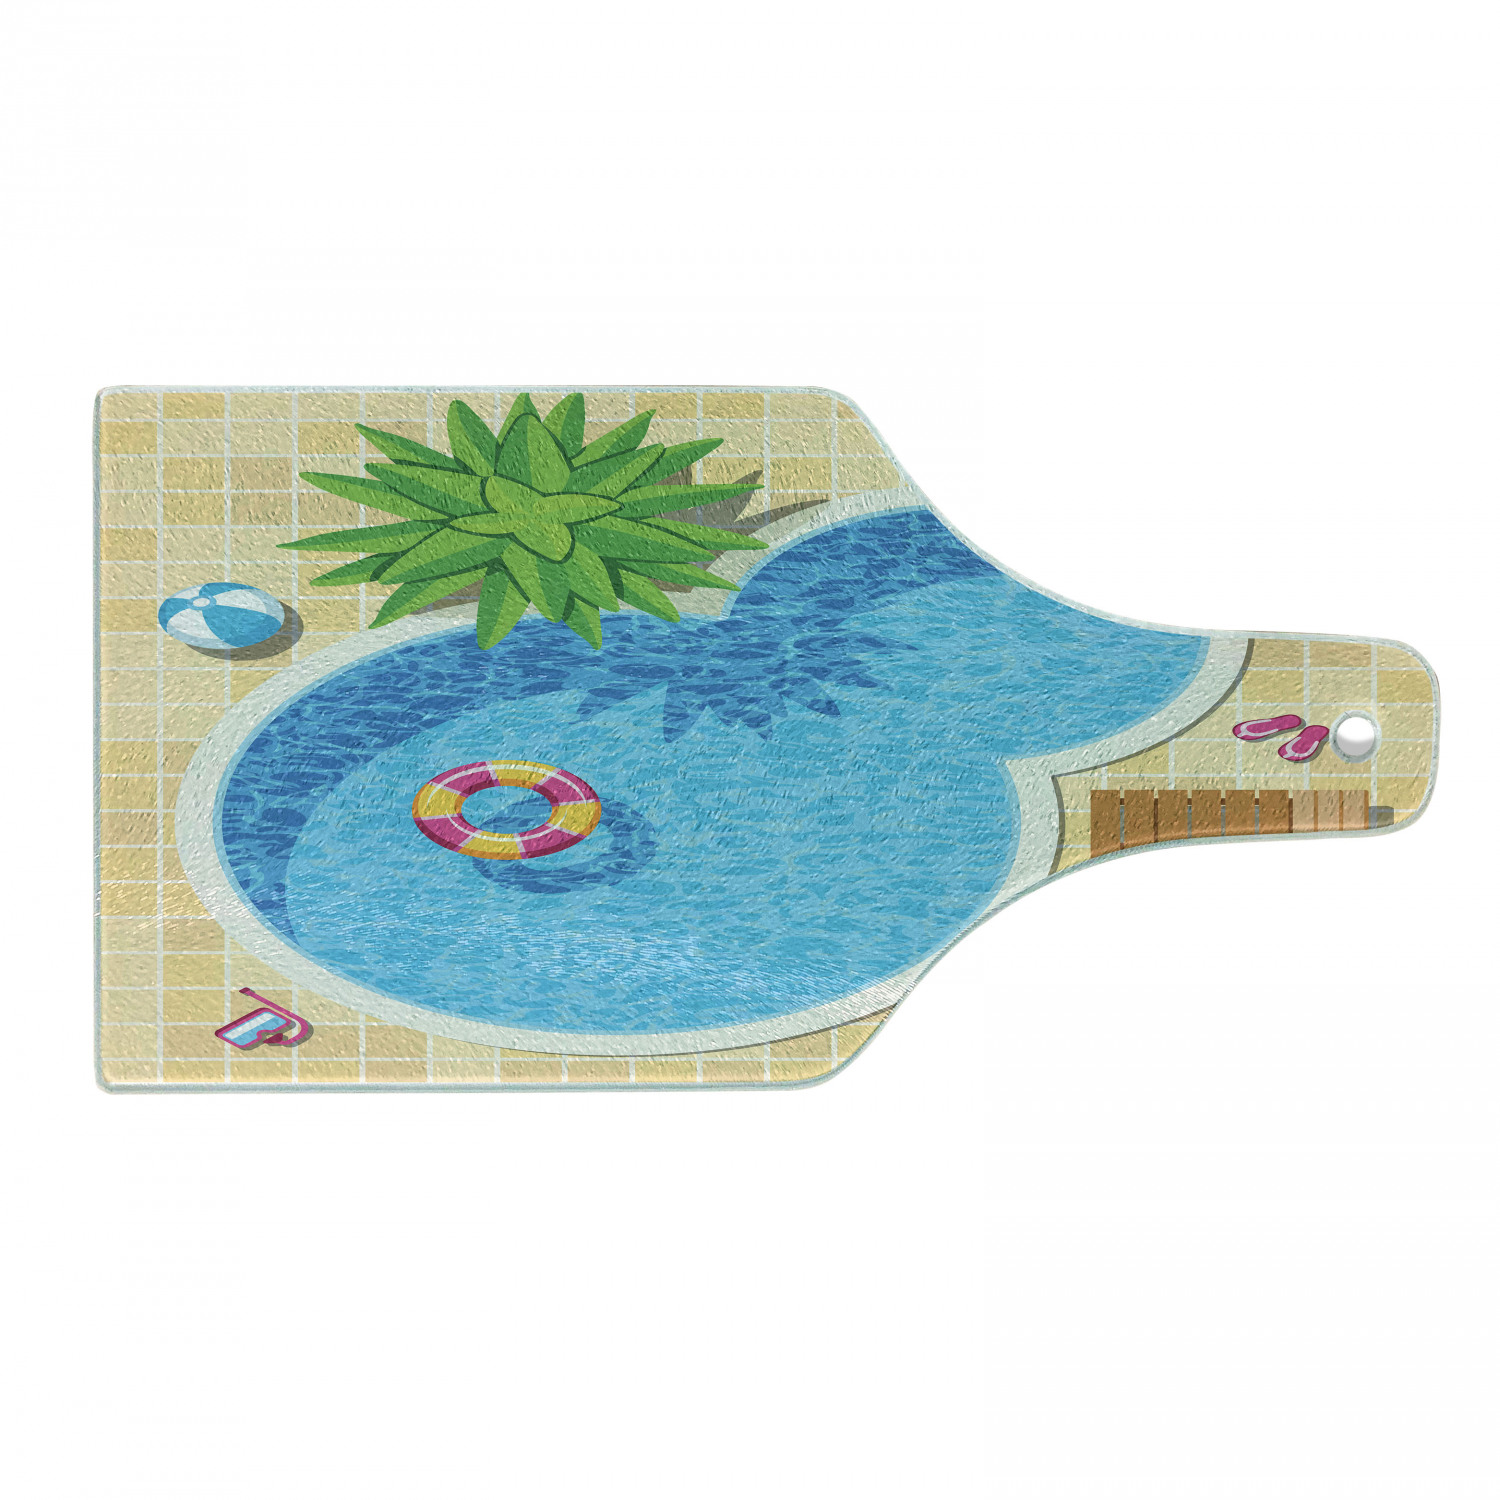 Pool Party Cutting Board, Relaxing Time Swimming Pool Fun Summer Vacation Joy and Leisure Outdoor Image, Decorative Tempered Glass Cutting and Serving Board, in 3 Sizes, by Ambesonne - image 1 of 2